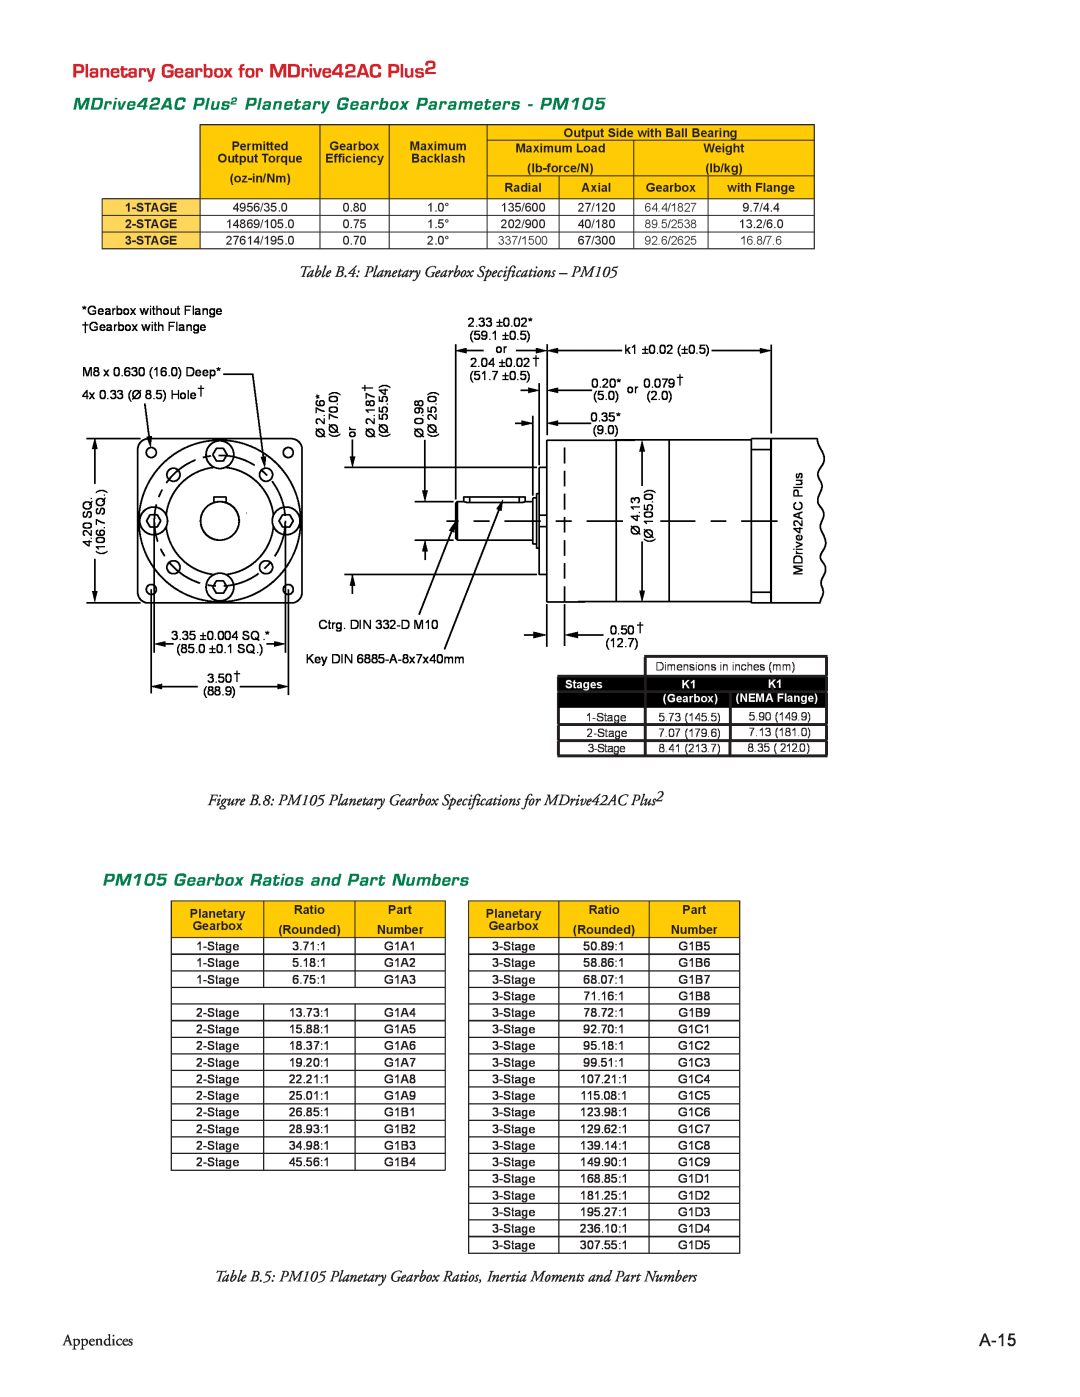 Intelligent Motion Systems MDrive34AC Planetary Gearbox for MDrive42AC Plus2, A-15, PM105 Gearbox Ratios and Part Numbers 